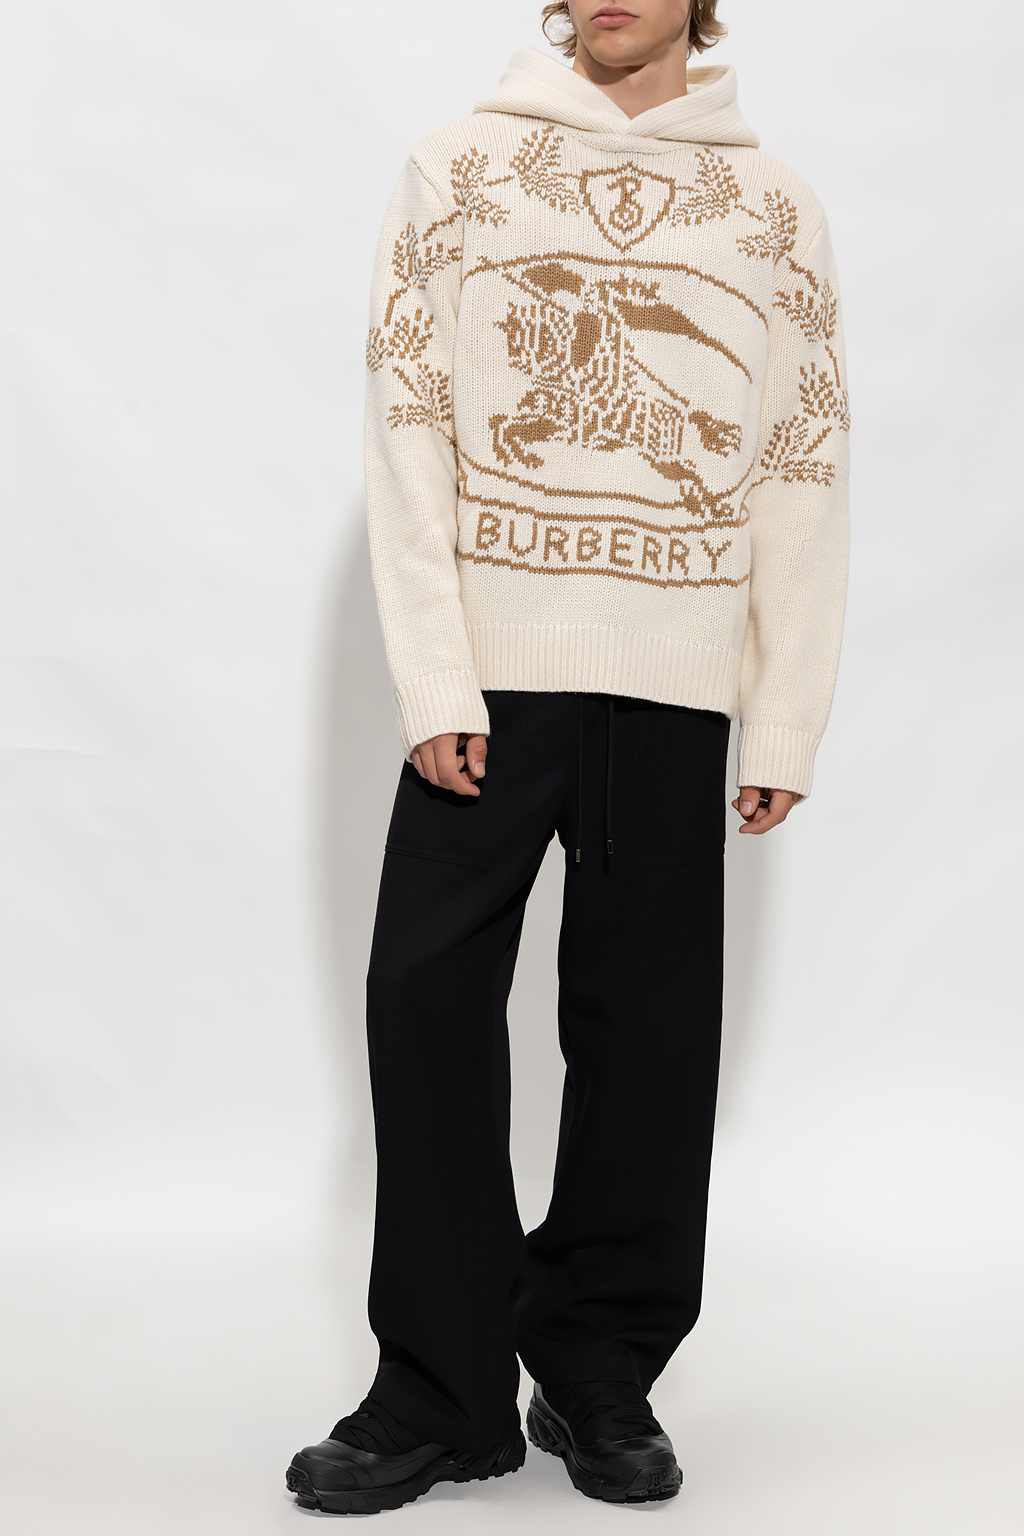 Burberry ‘Amley’ hooded sweater